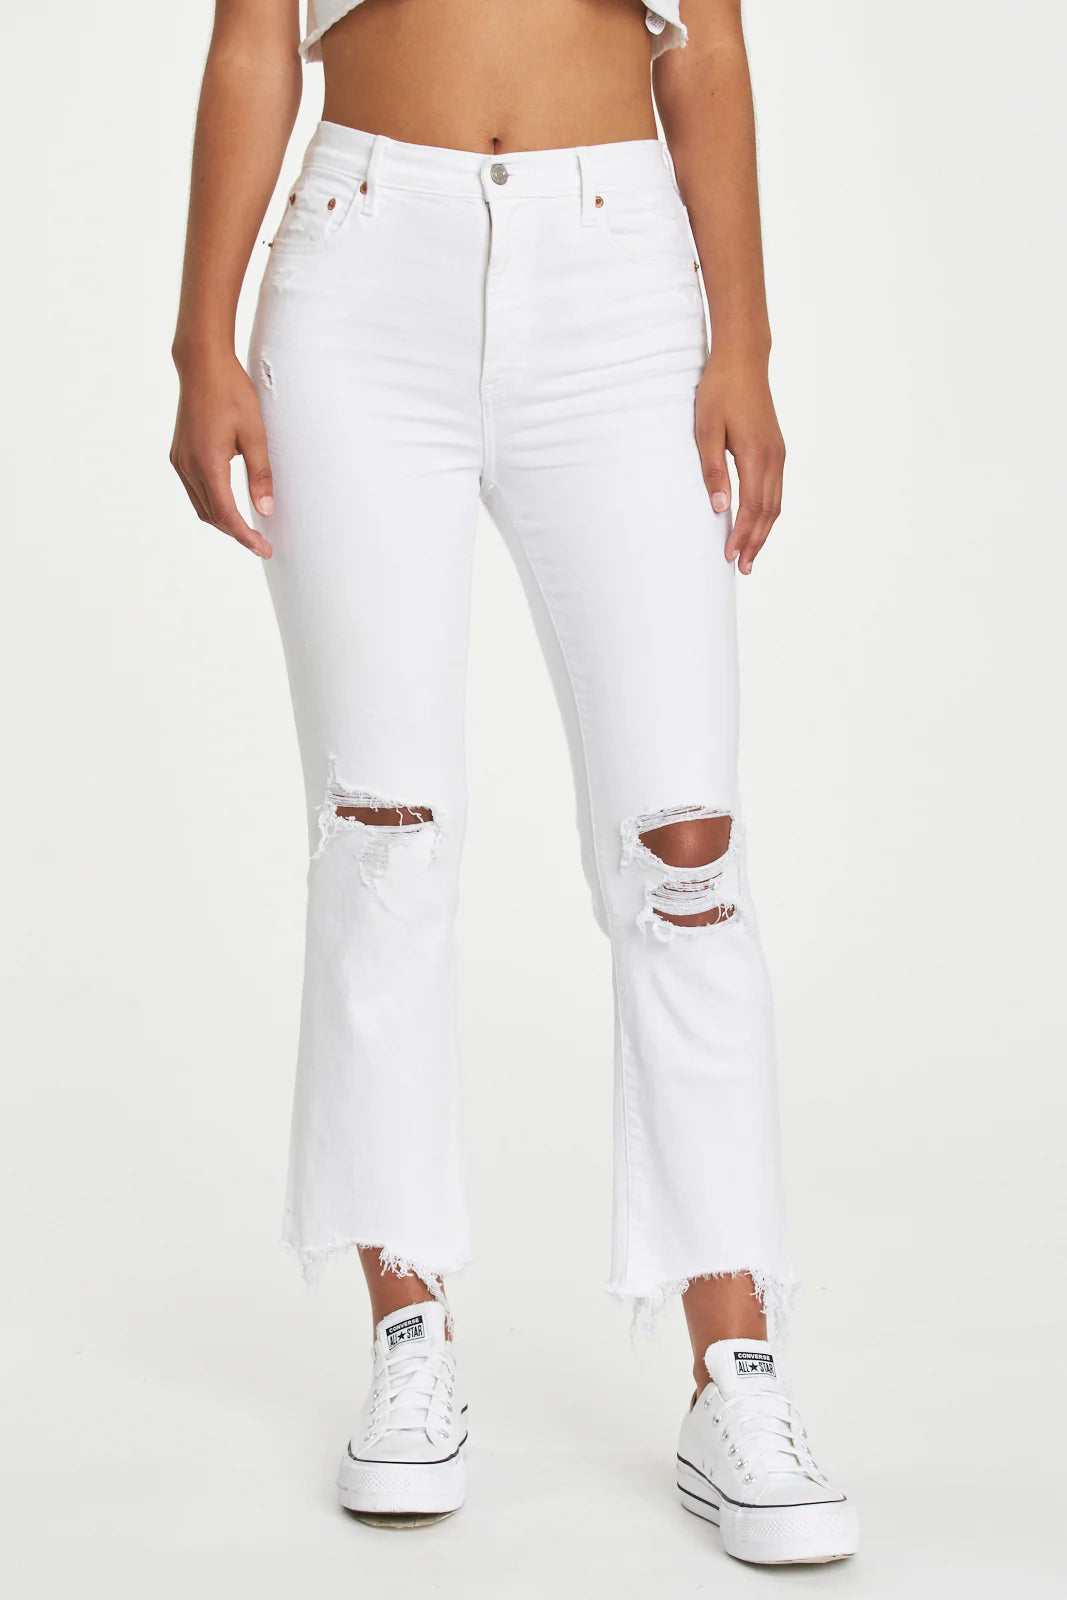 Shy Girl Flare Jeans